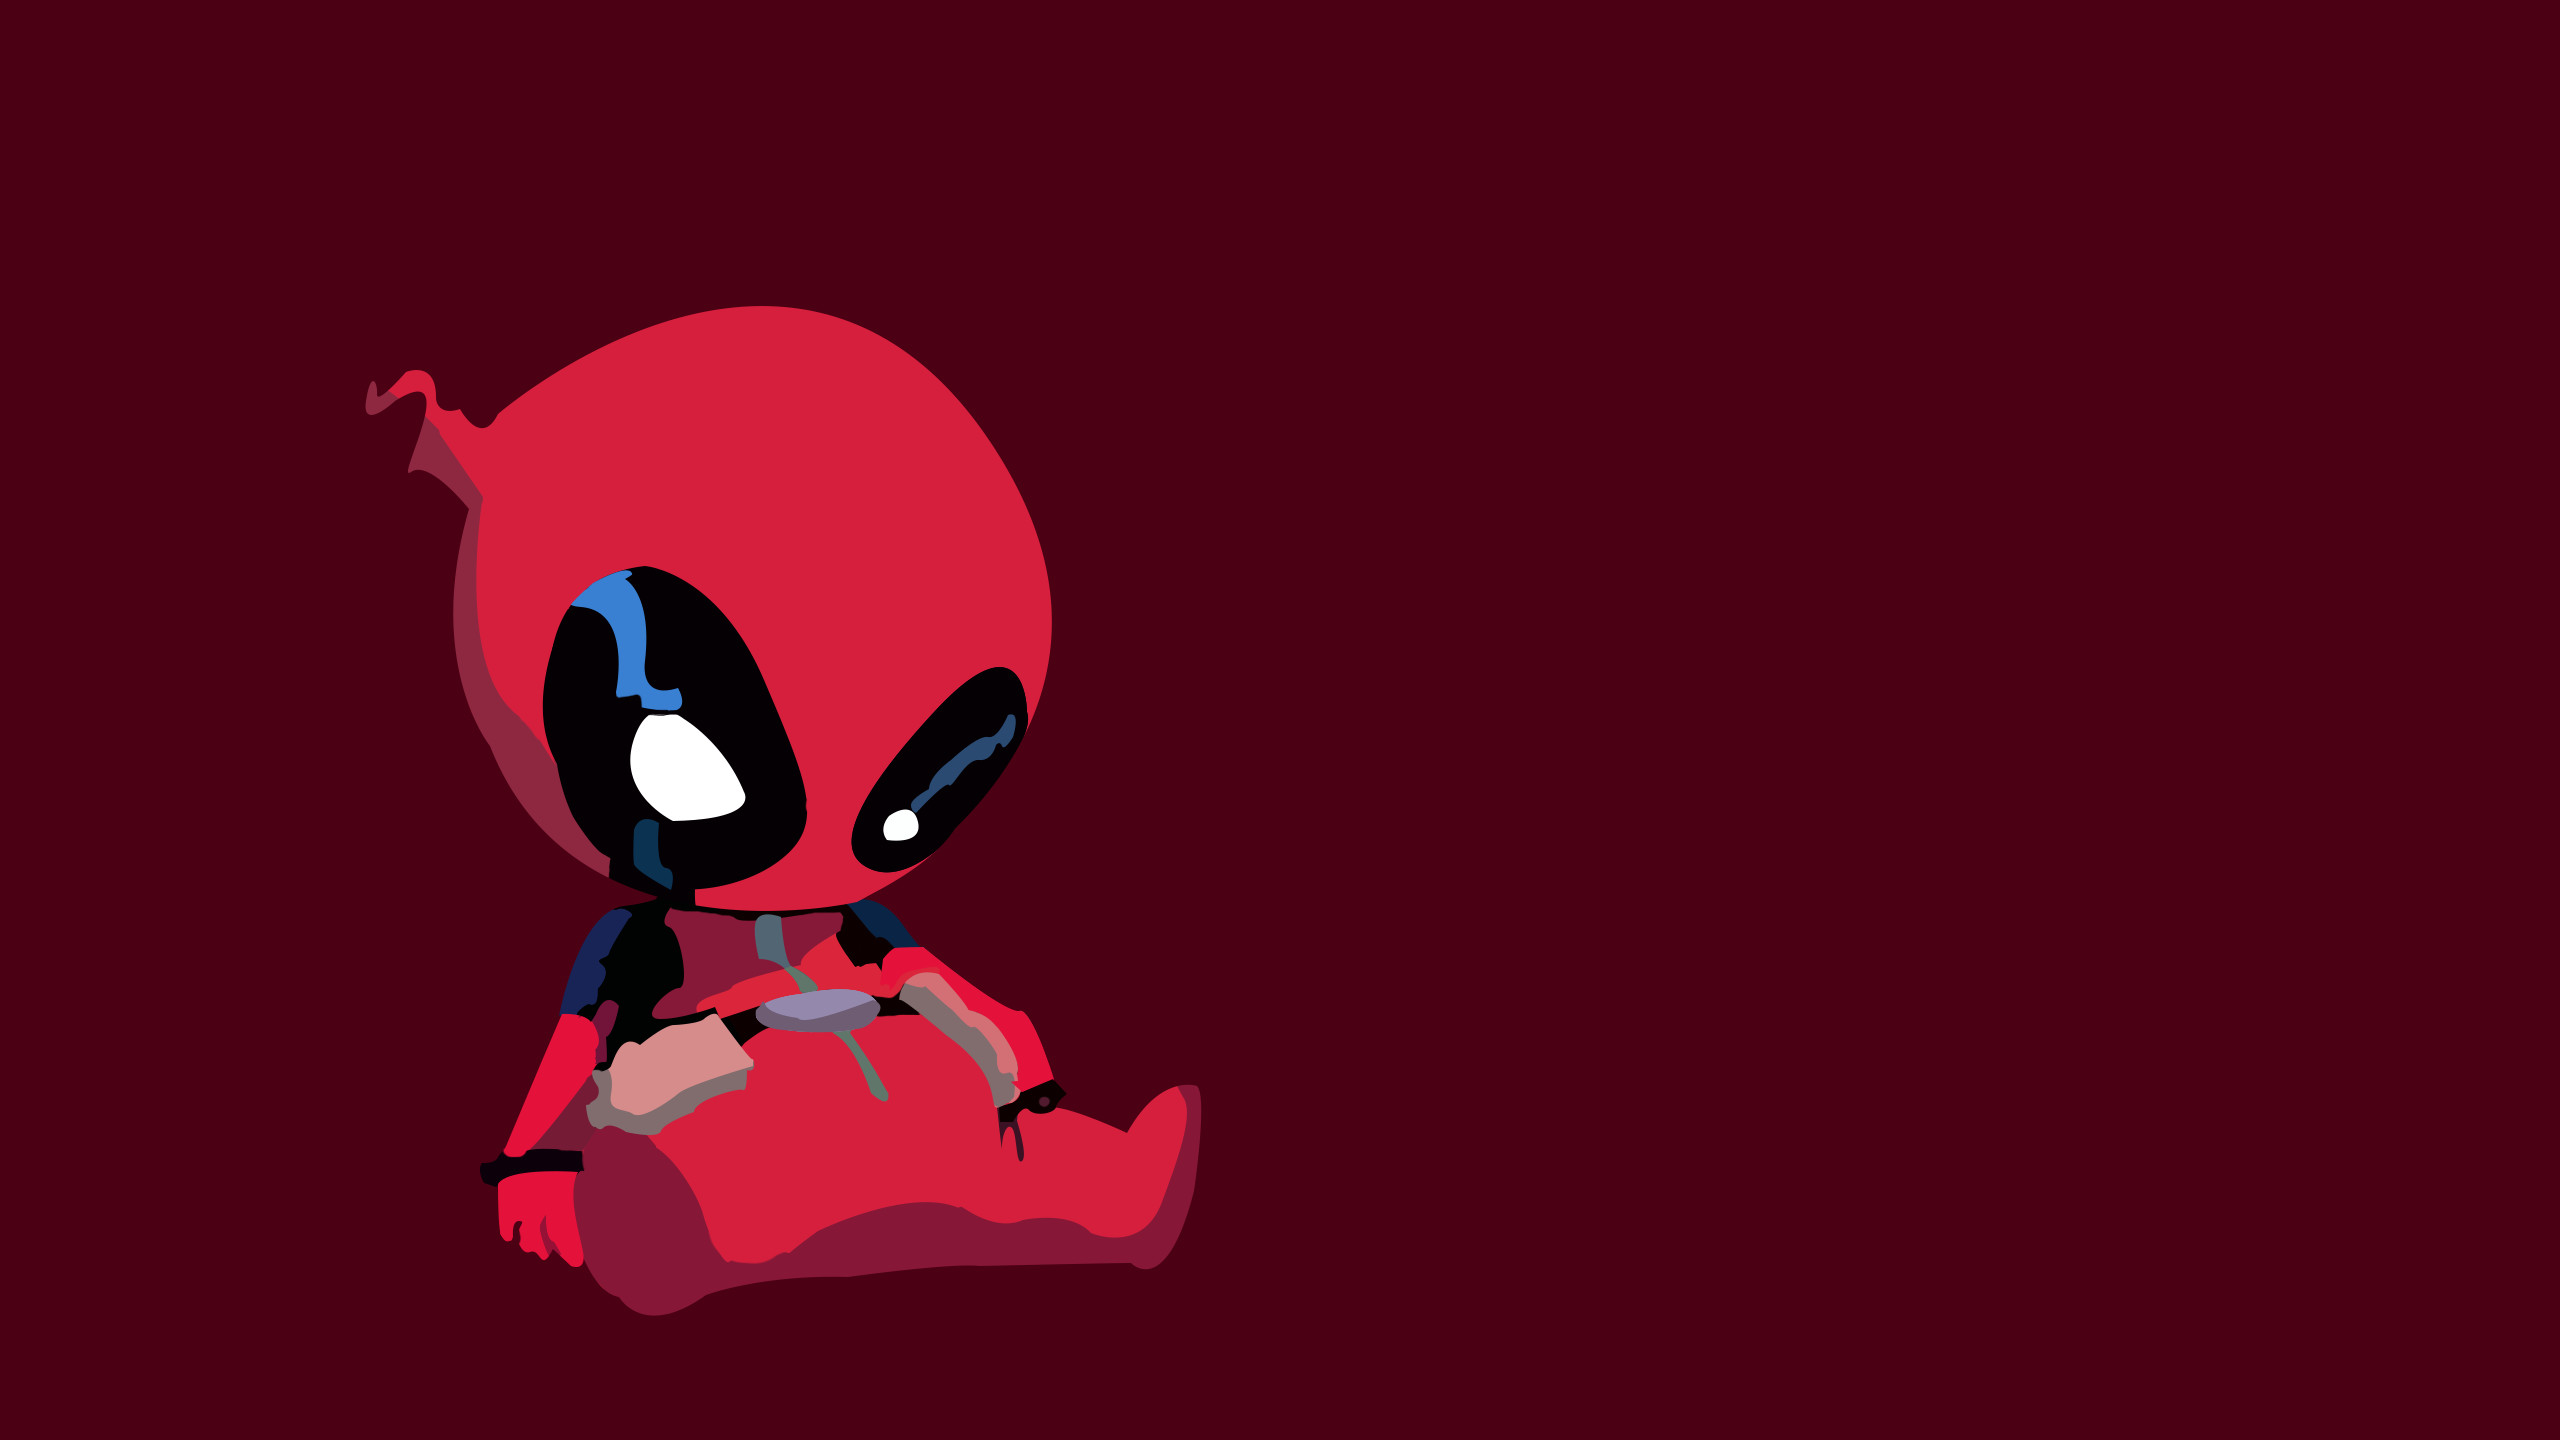 2560x1440 HD Images Jigsaw Collection Source Â· Deadpool Chibi Swag by RizZeArtZ  Deadpool Chibi Swag by RizZeArtZ